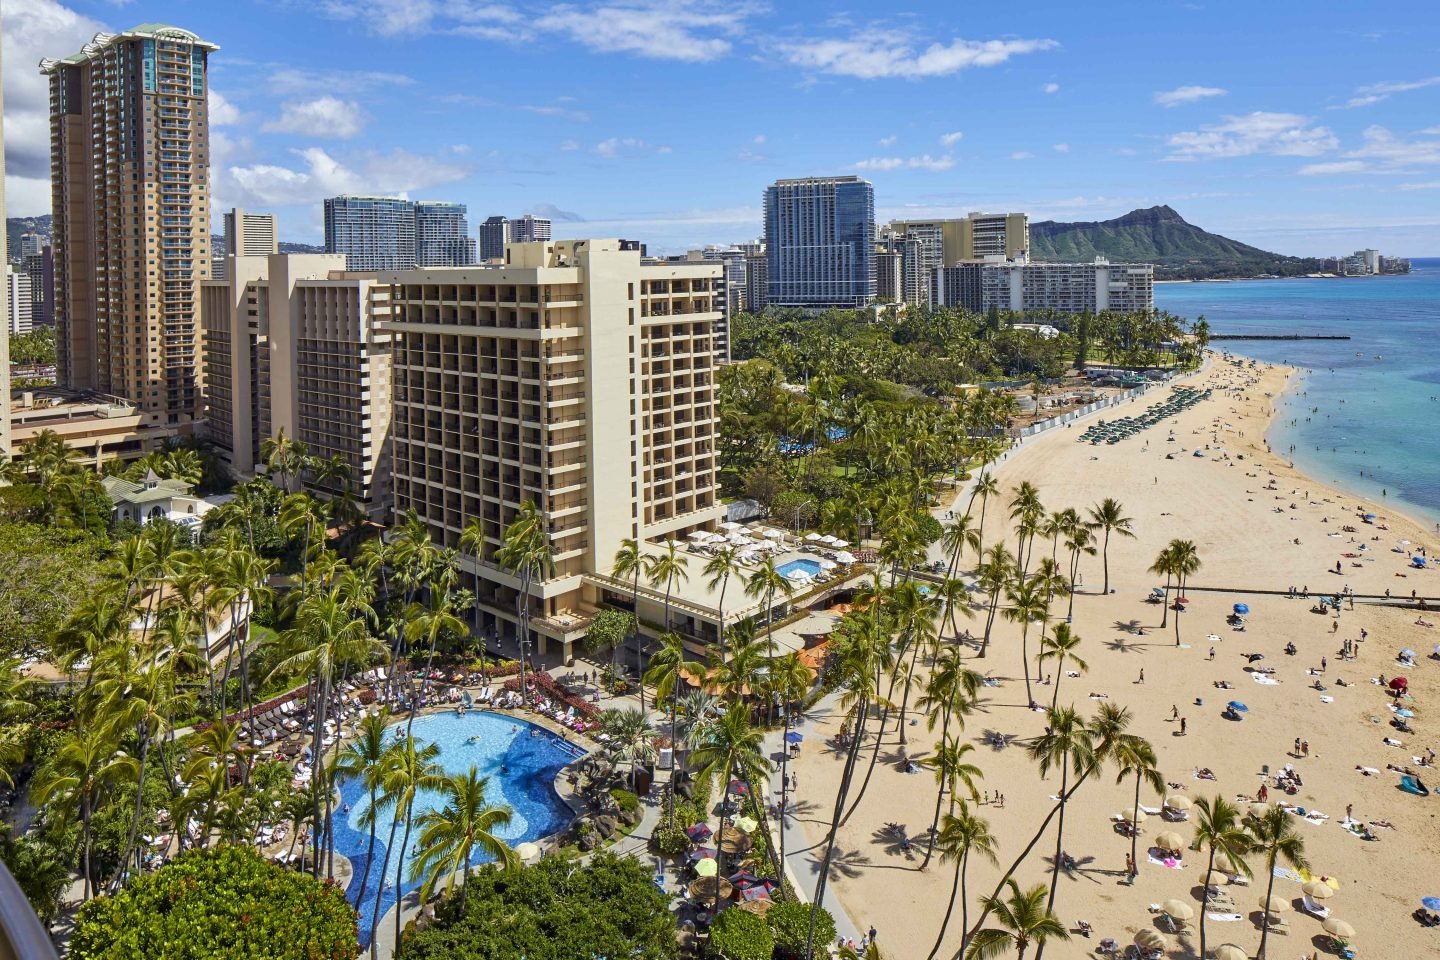 average hawaii trip cost for 2